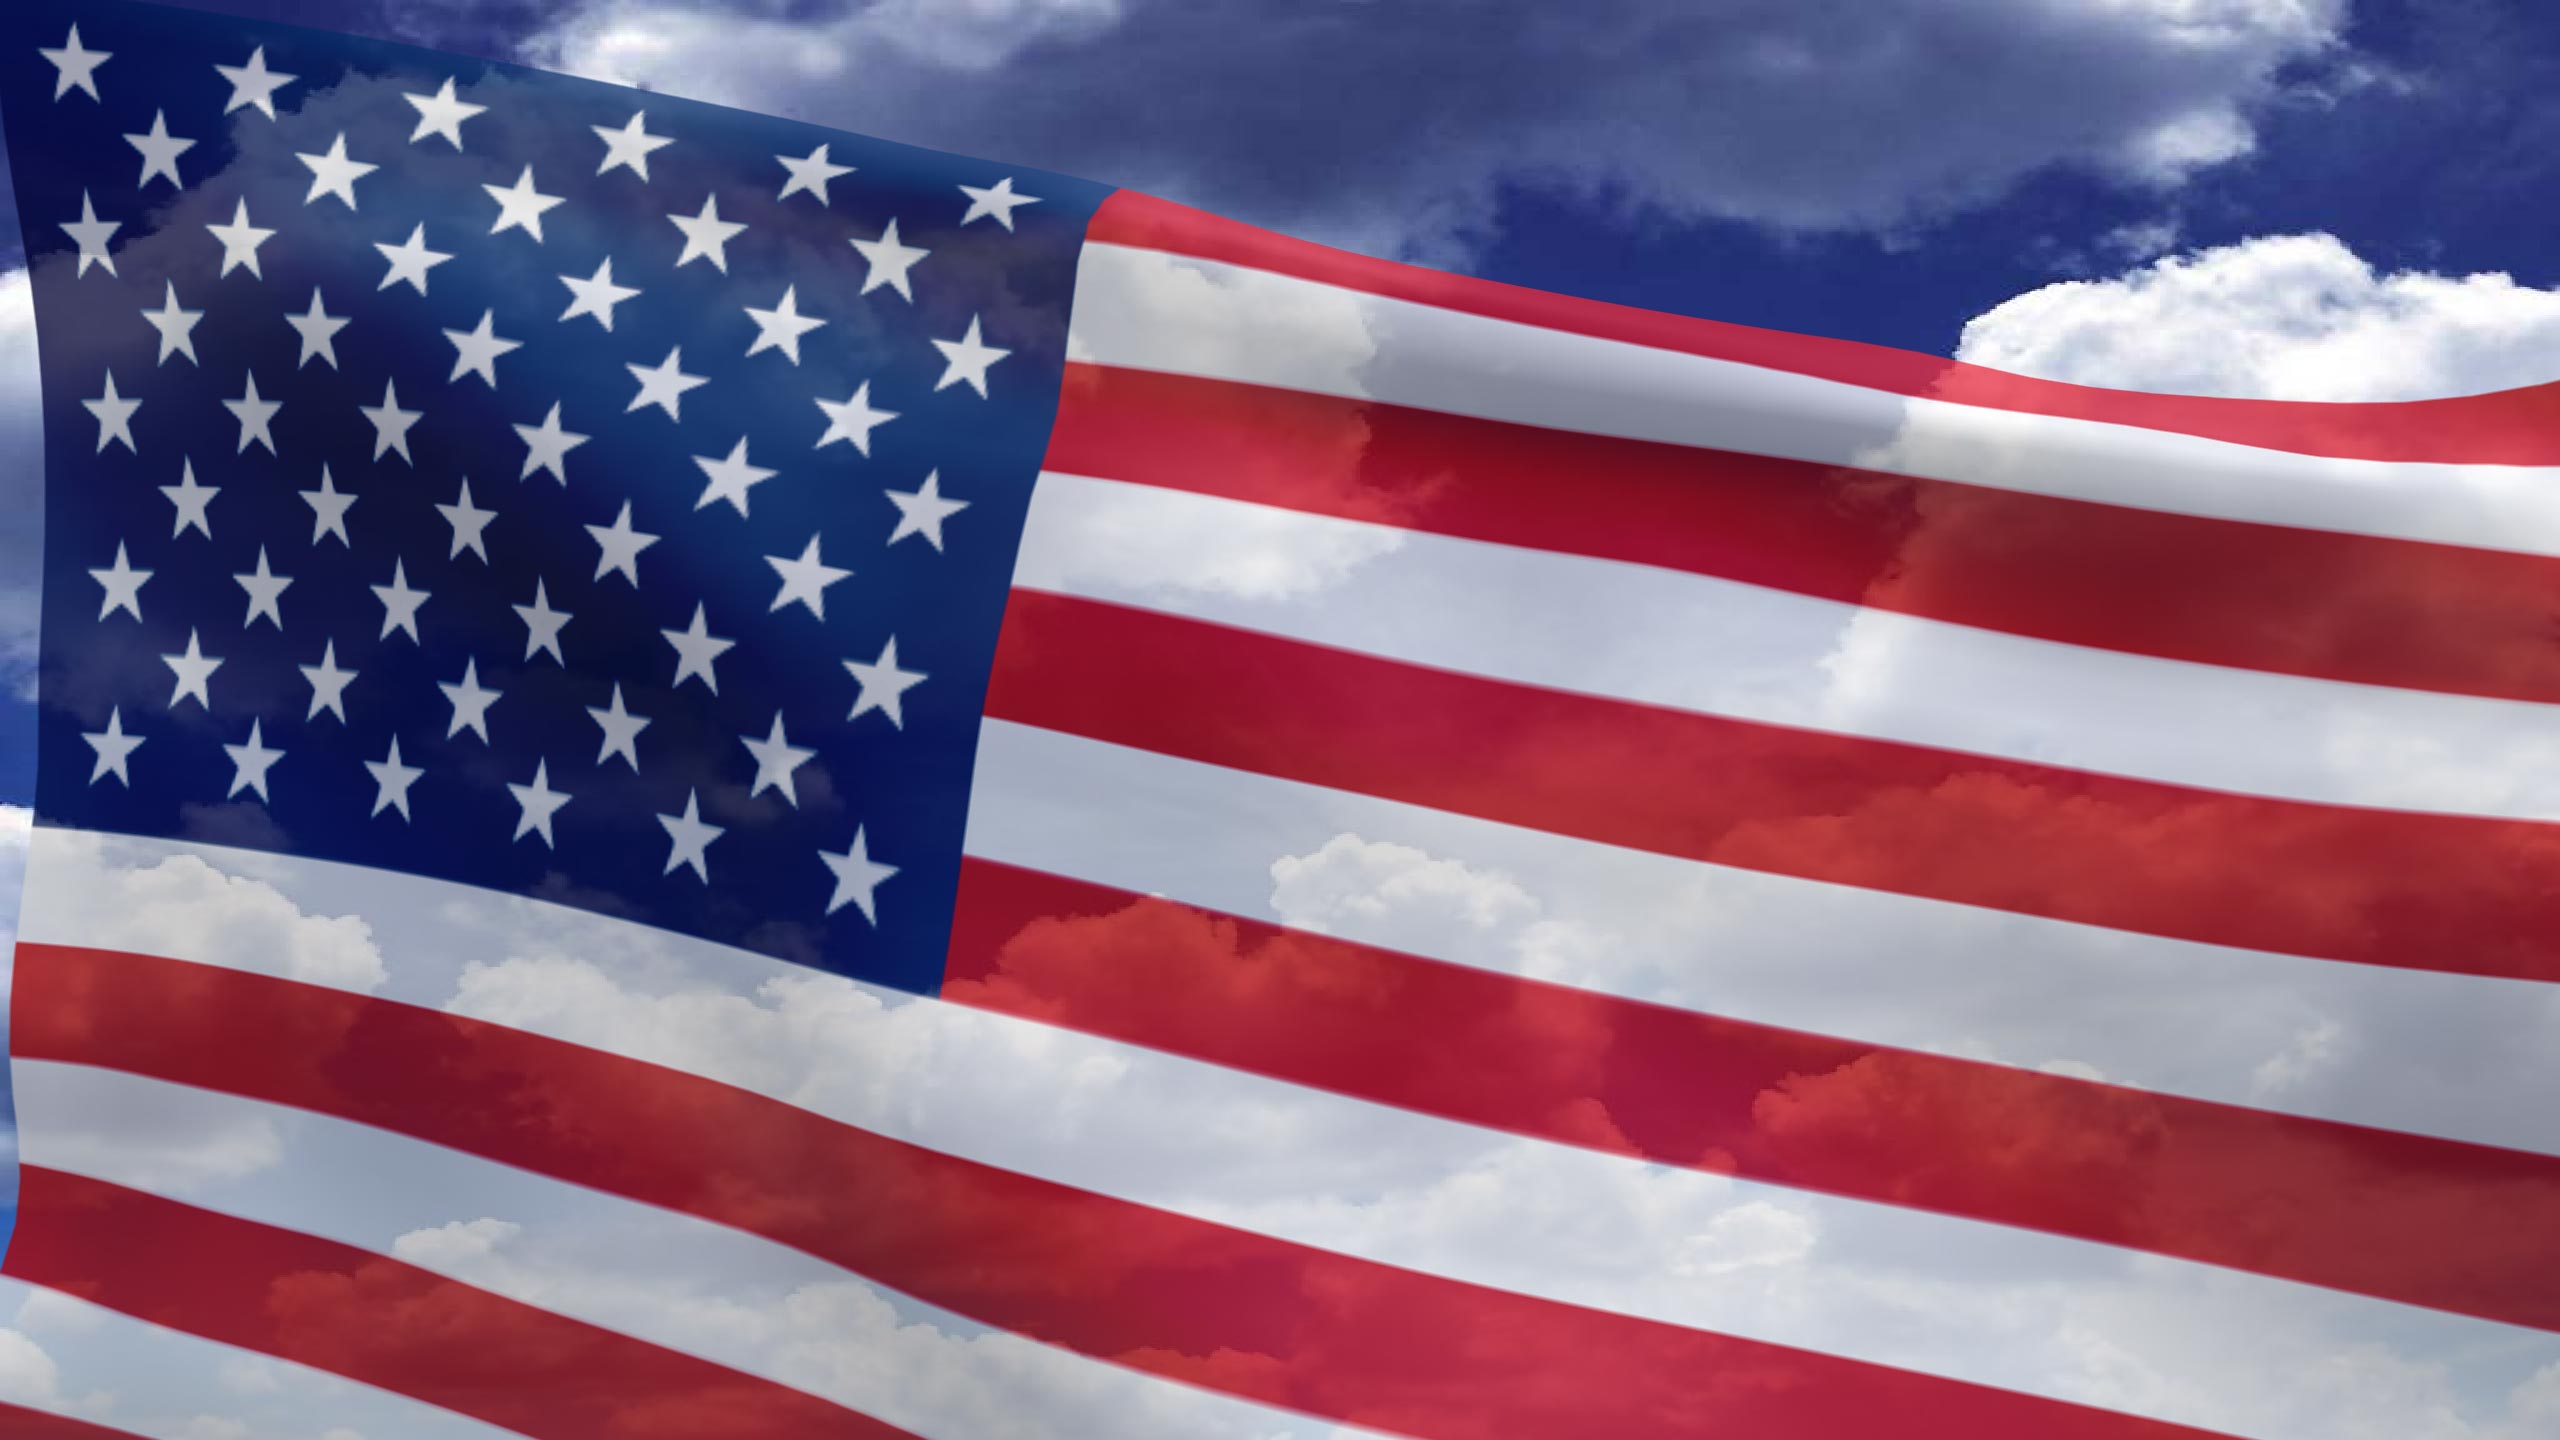 America And Indonesia - HD Wallpaper 